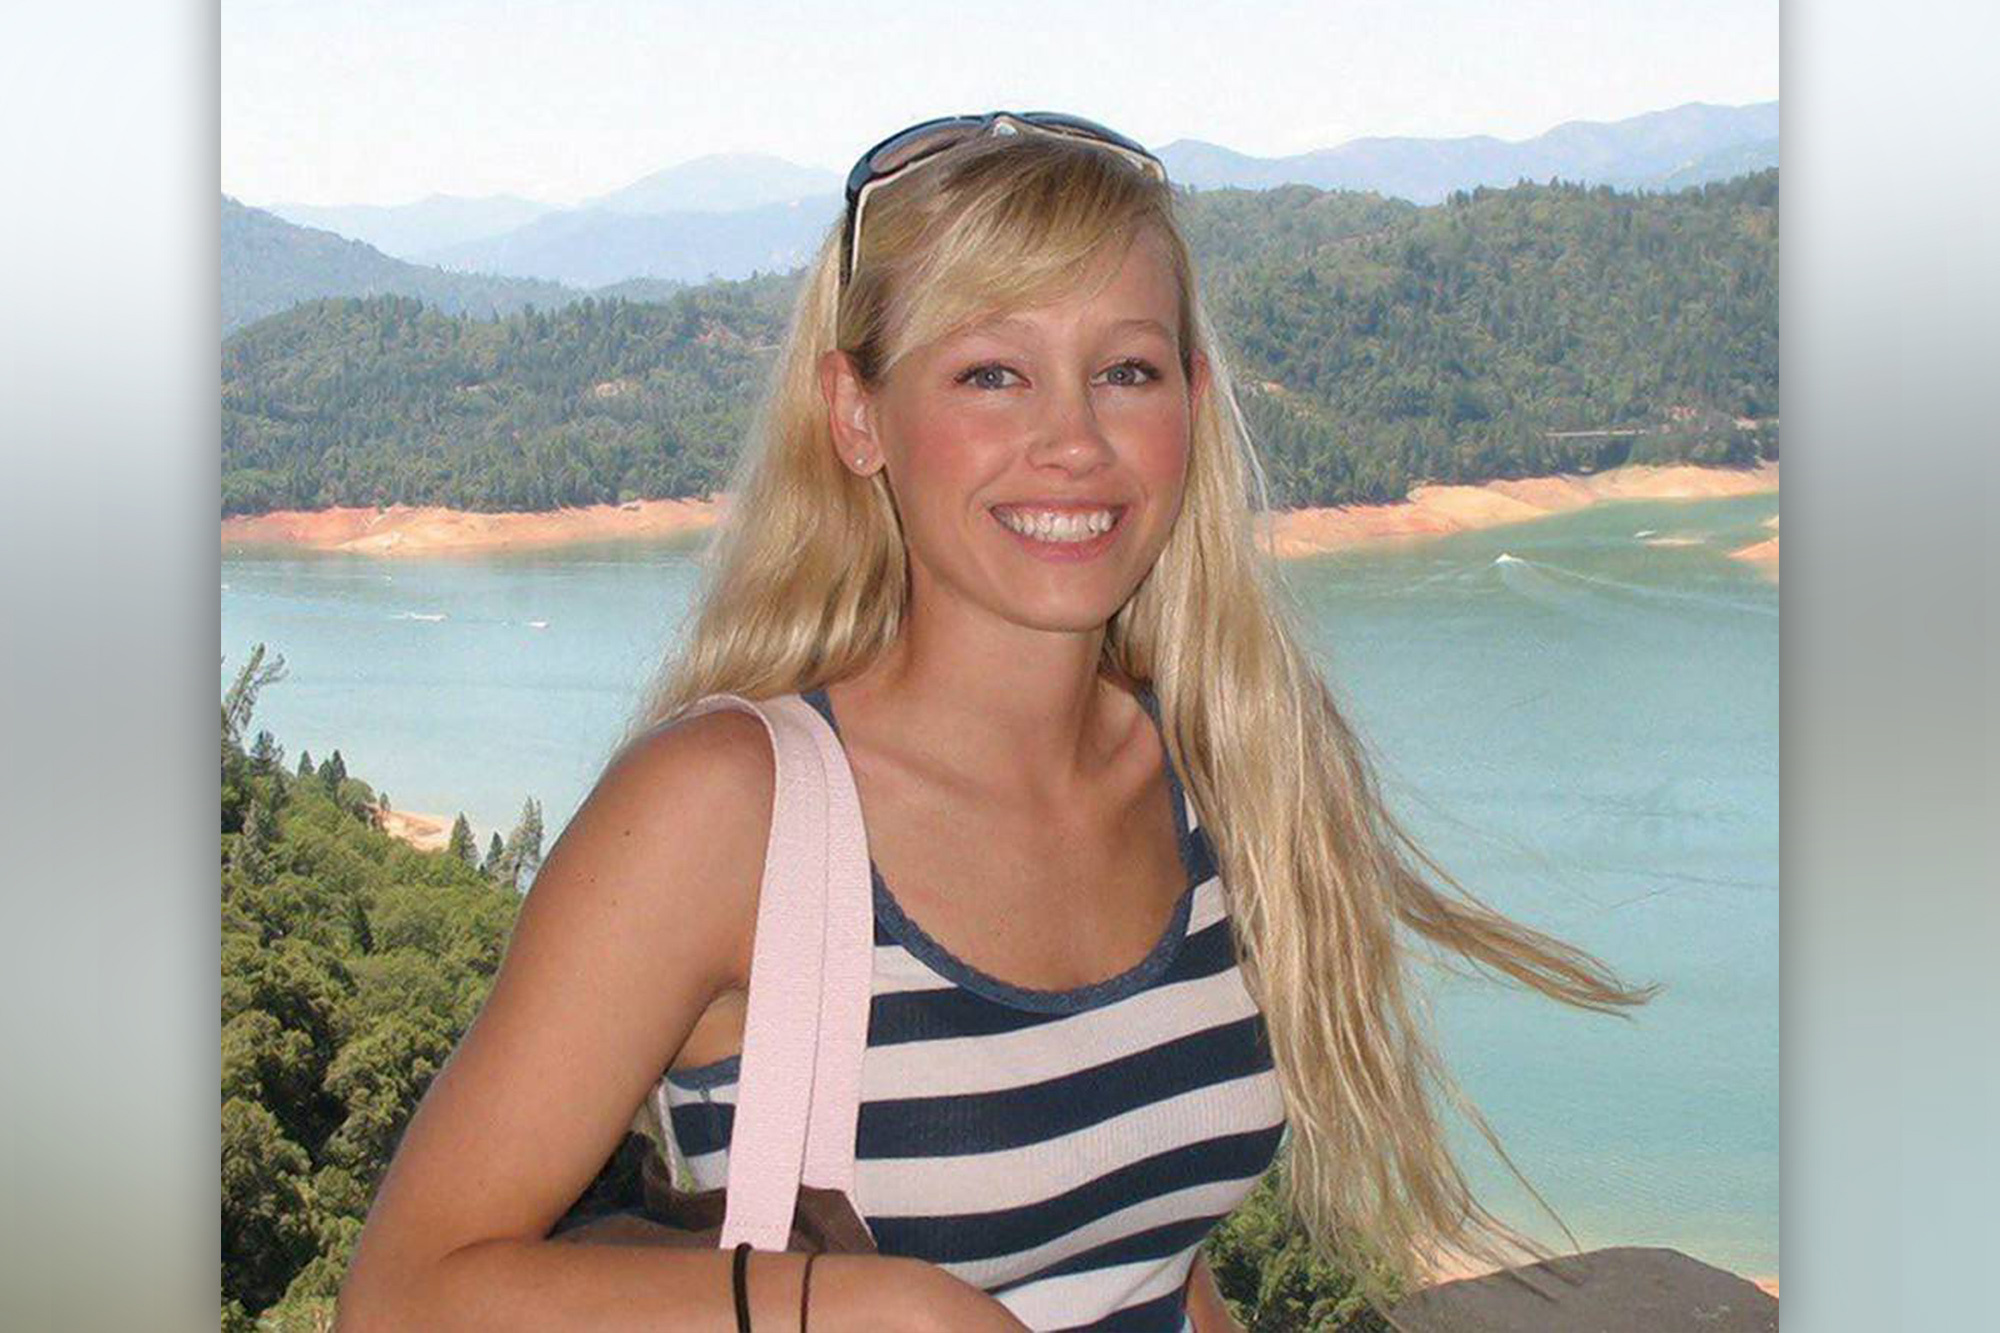 Sherri Papini, California Woman Who Faked Her Own Kidnapping, Is